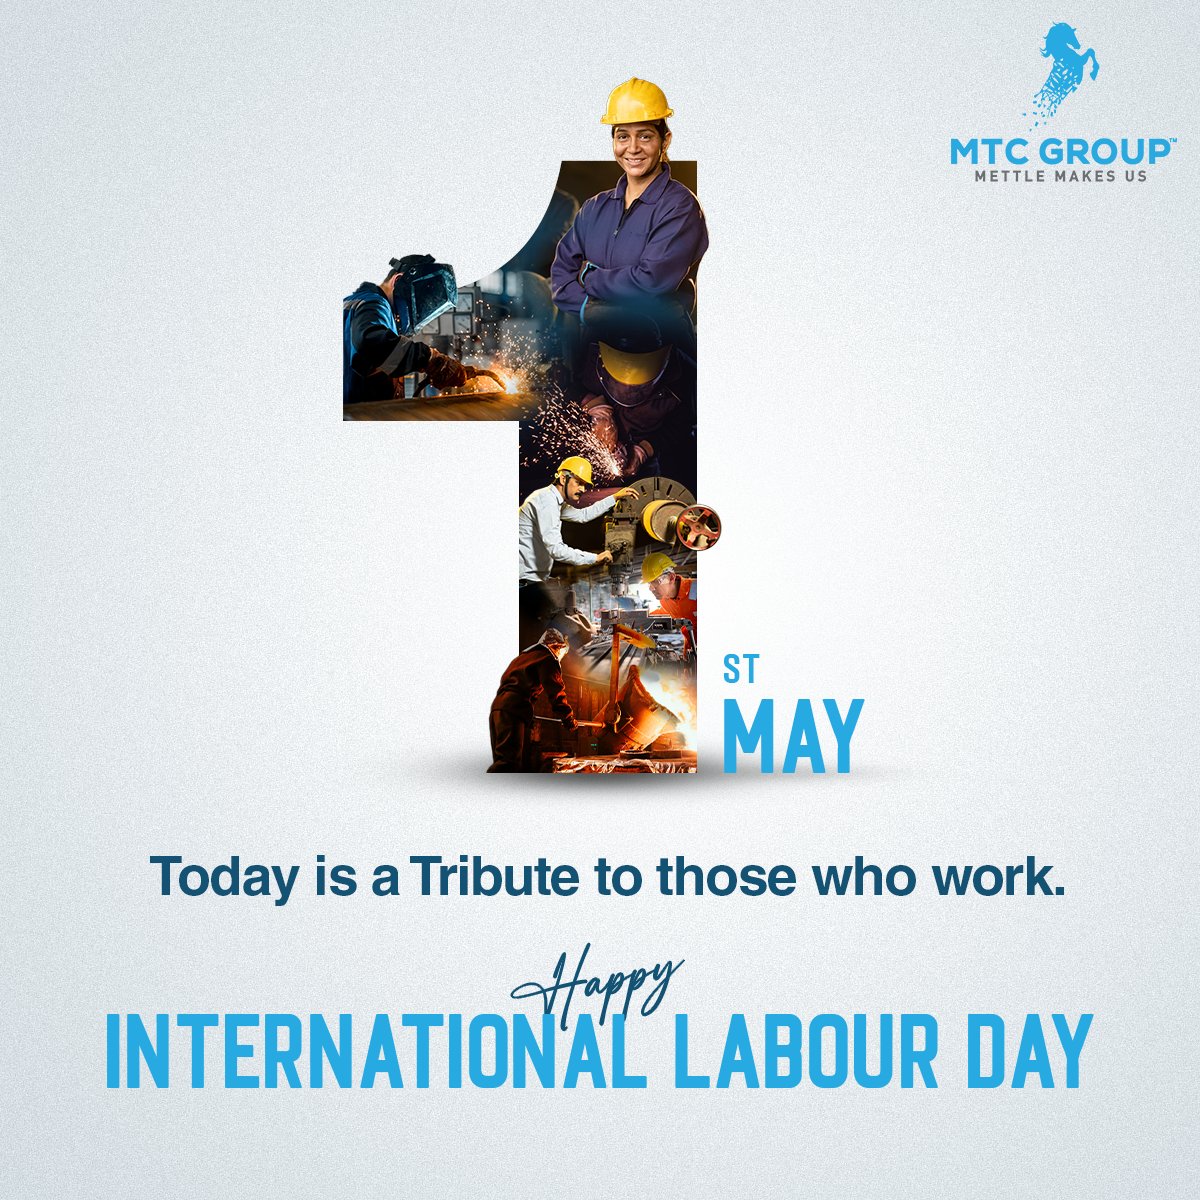 Your resilience, passion, and unwavering commitment truly define the driving force propelling our success. We deeply appreciate your dedication and cherish your integral role in shaping the world. #InternationalLabourDay #MTCGroup